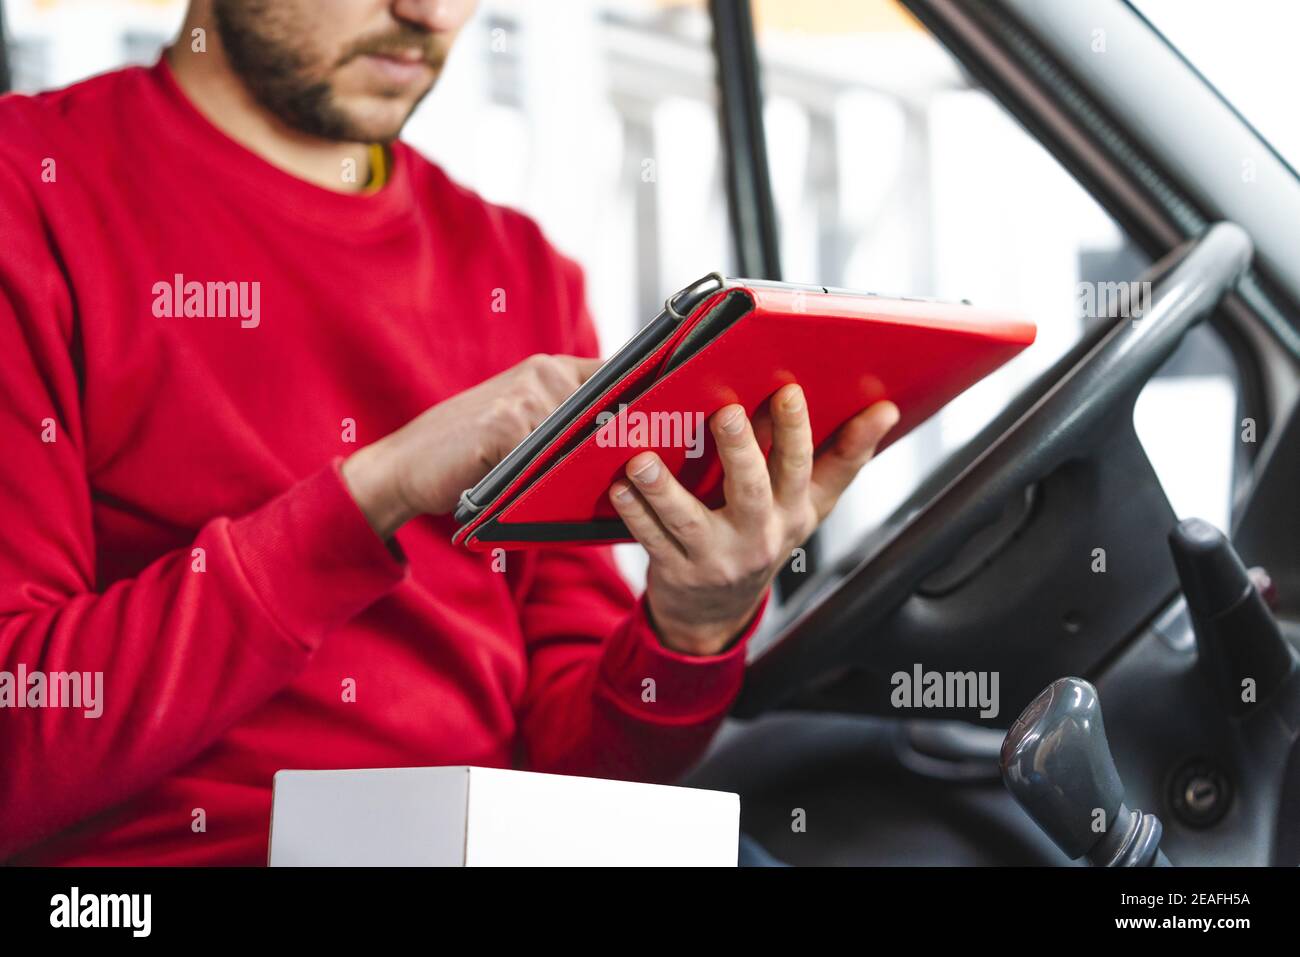 Delivery man registering the details of the product with a tablet while sitting on the driver's seat Stock Photo